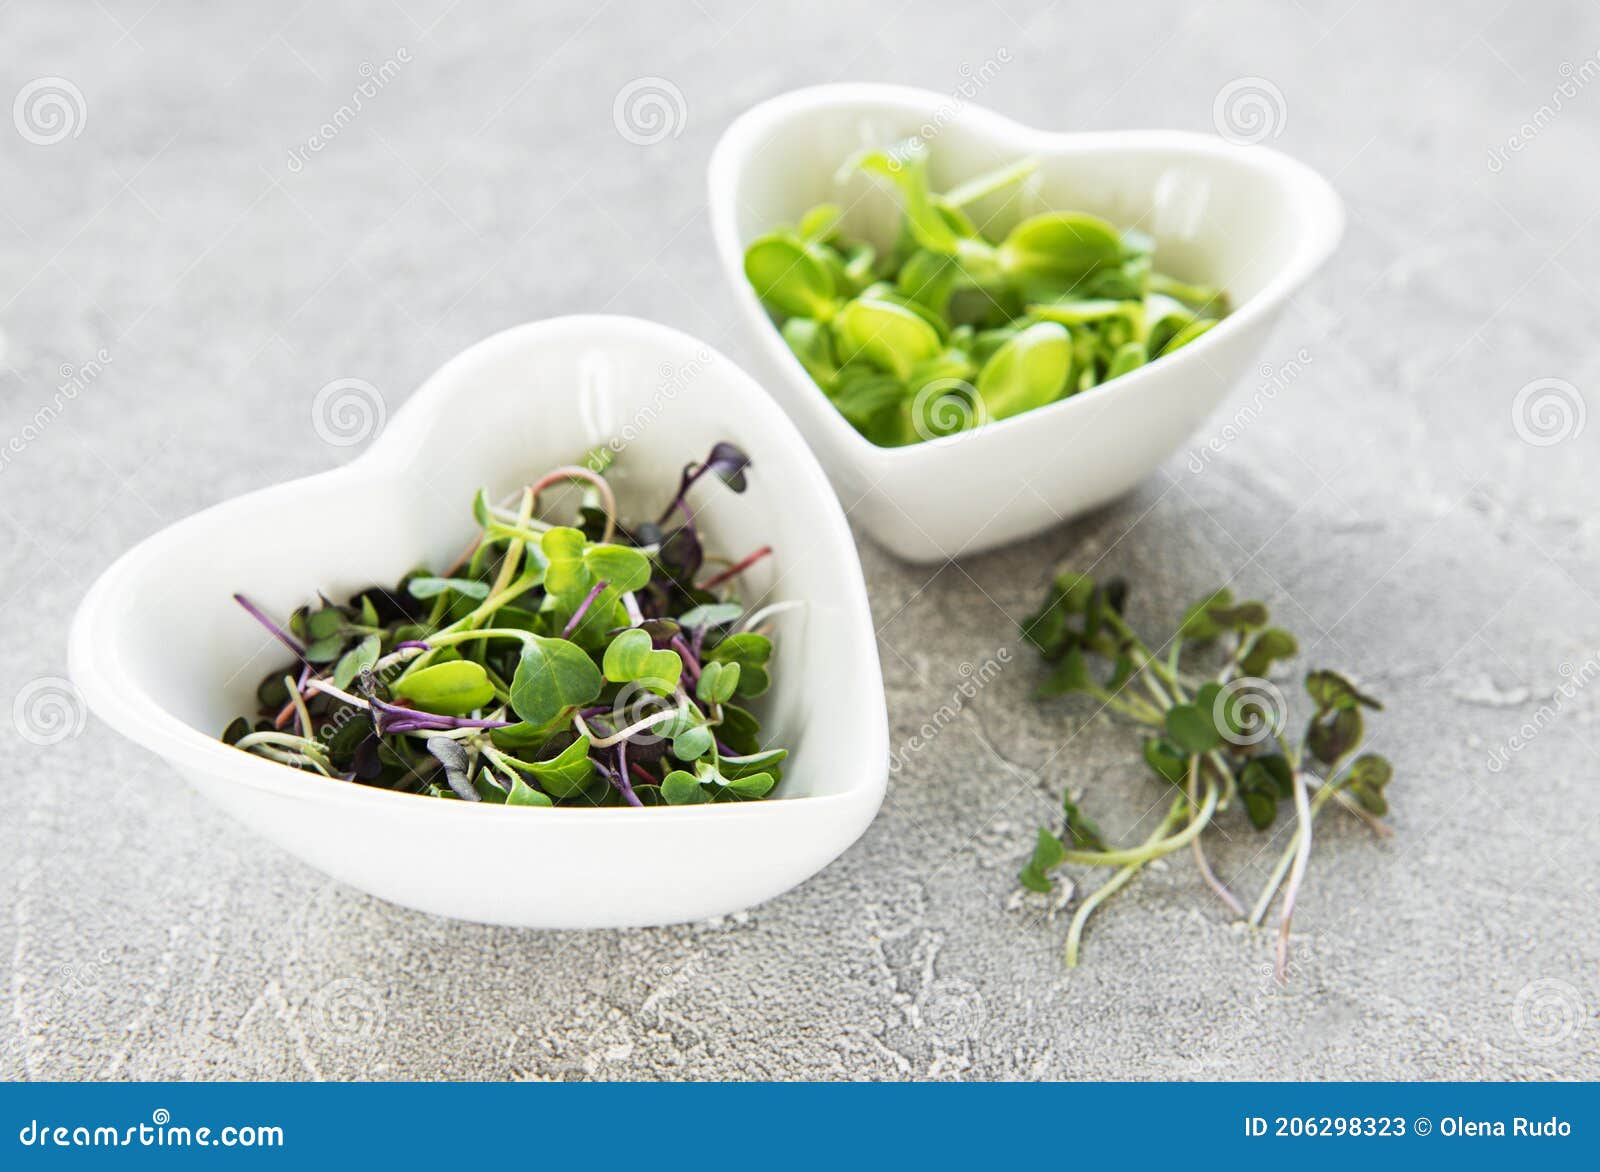 assortment of micro greens at concrete background,  top view.